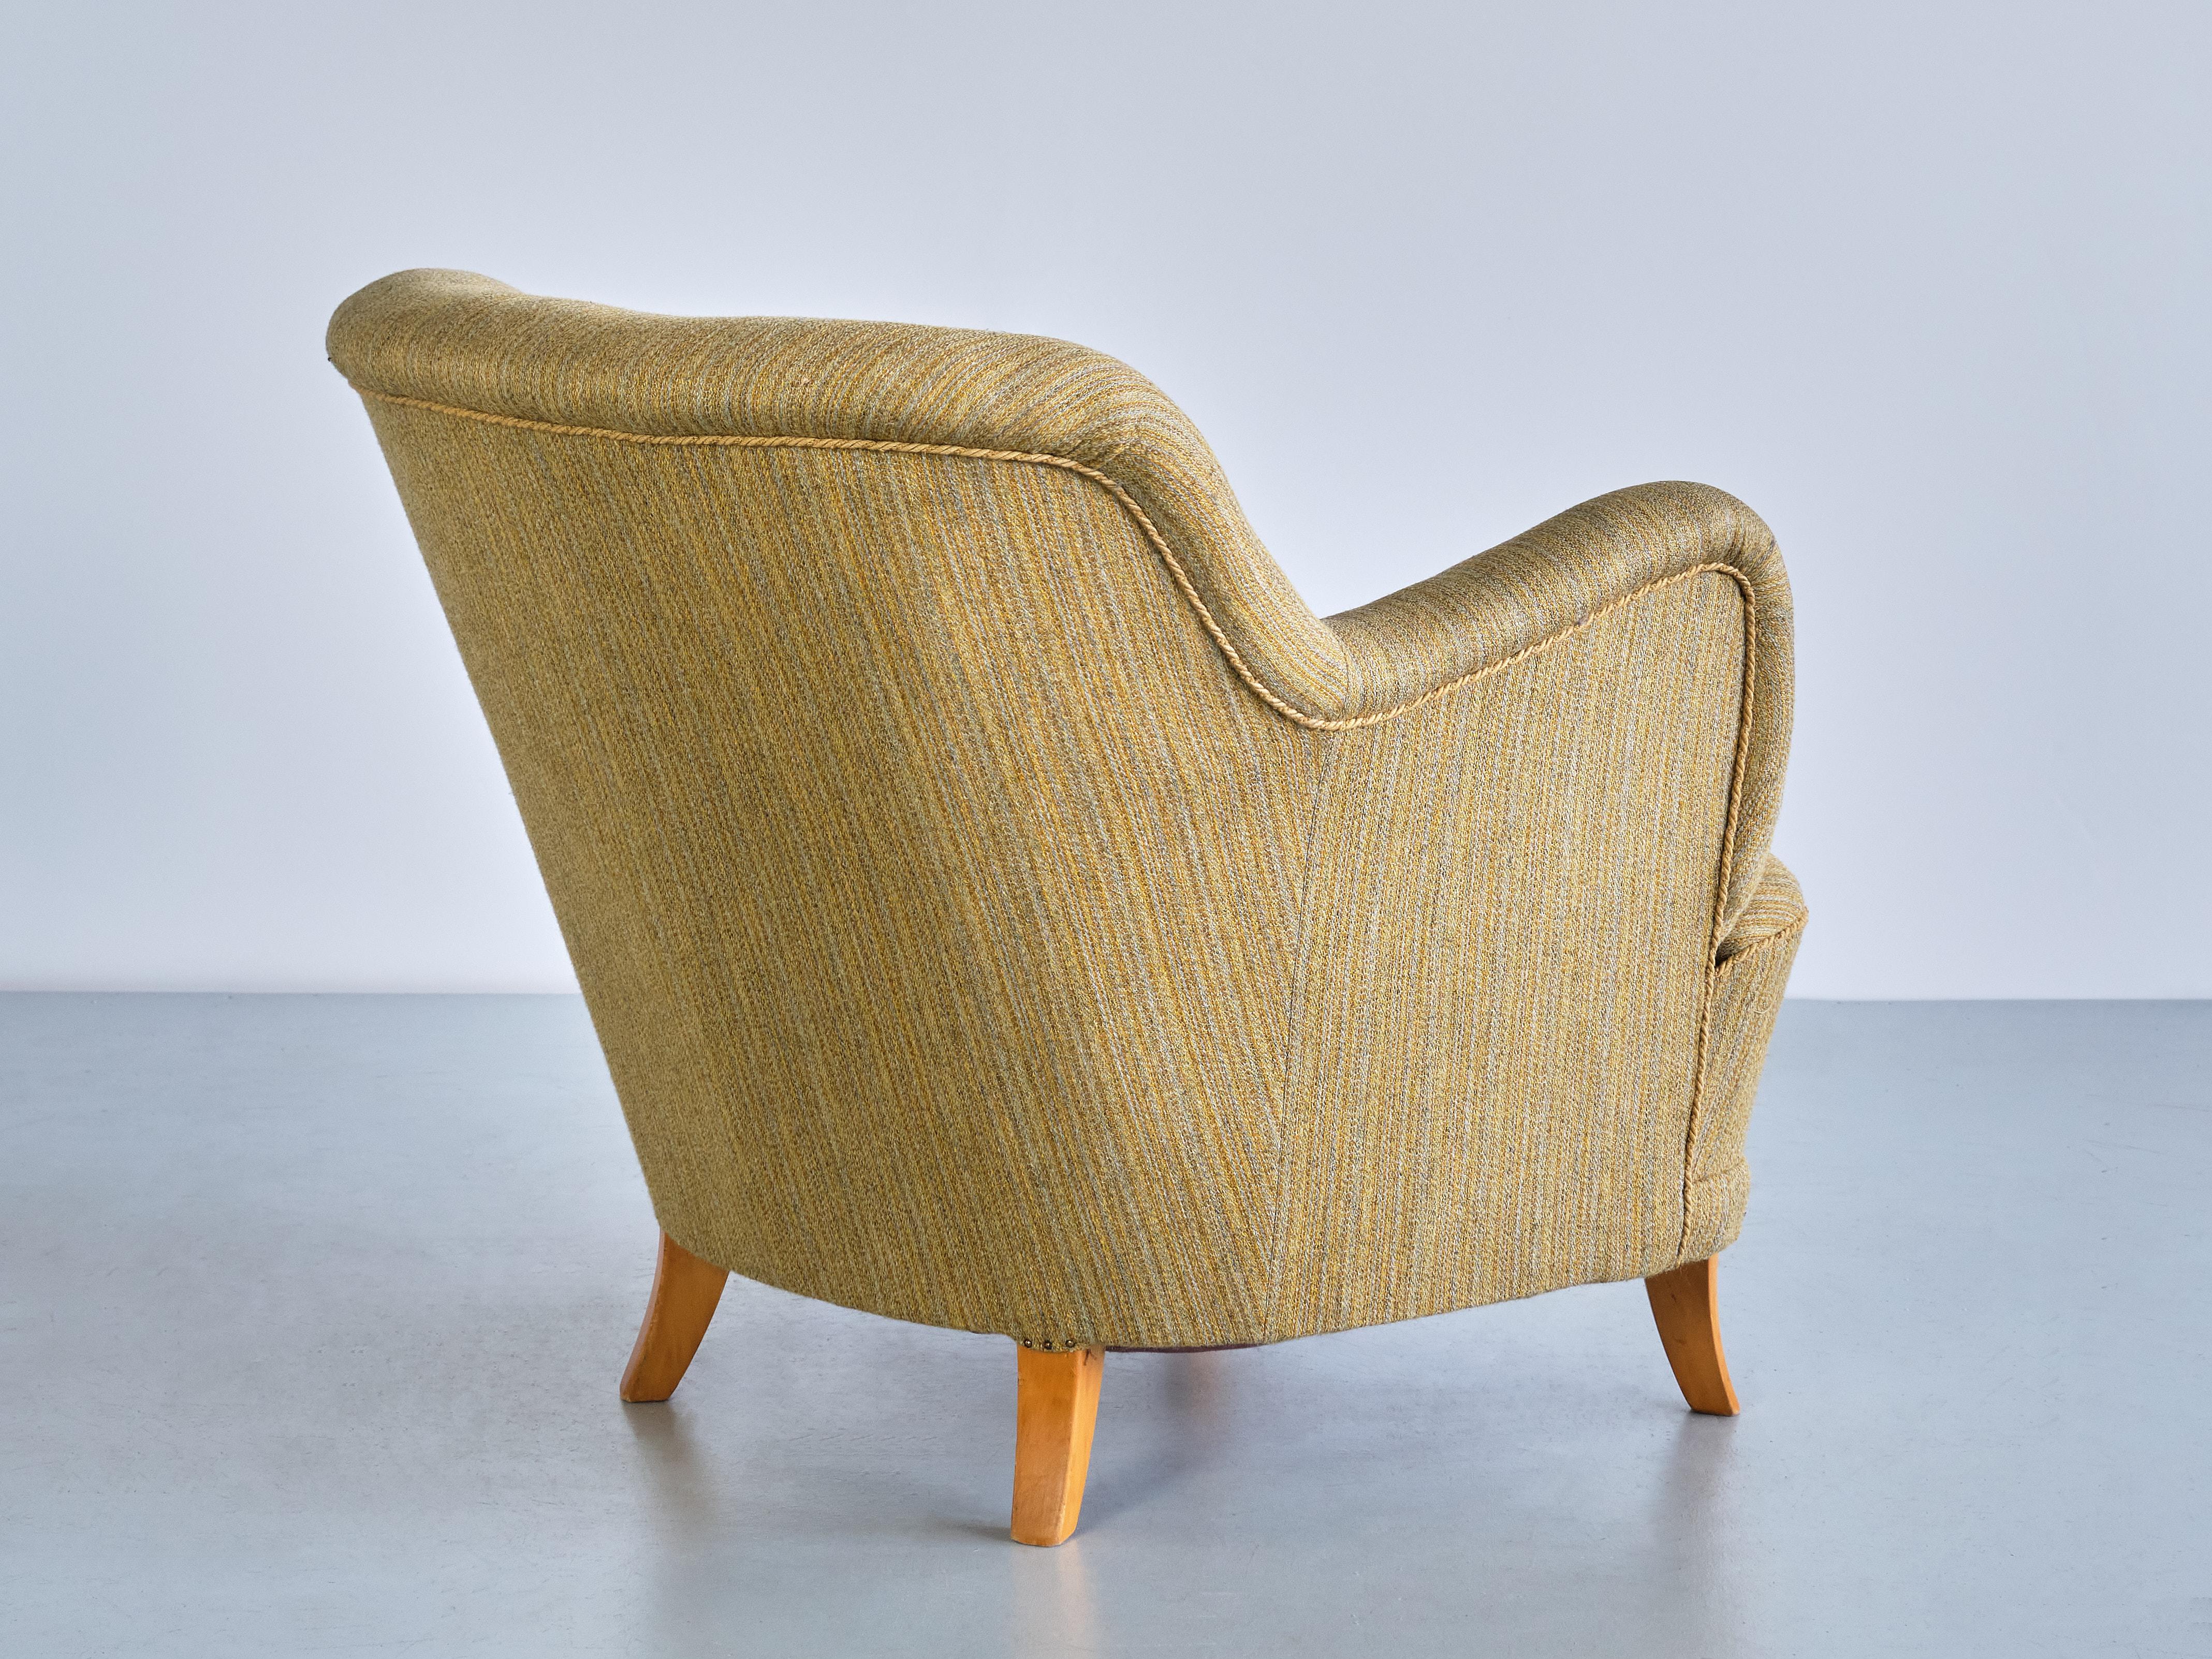 Sculptural Pair of Gustav Axel Berg Armchairs in Beech and Wool, Sweden, 1940s For Sale 1